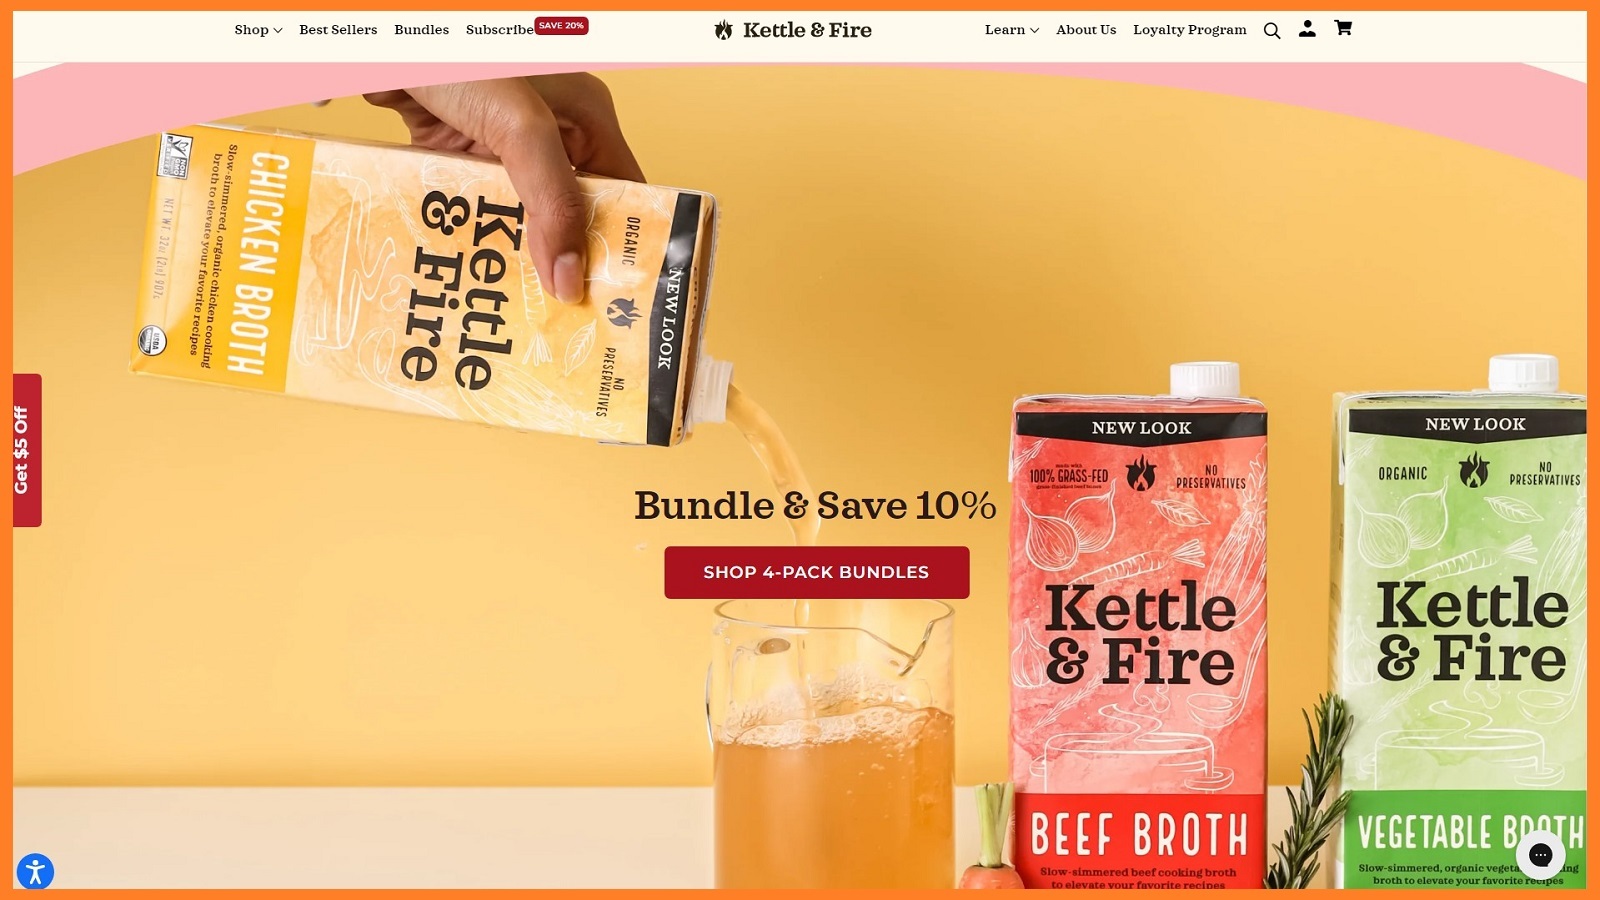 Kettle and Fire Bone Broth Review: Is It Hype Or Worth the Money?